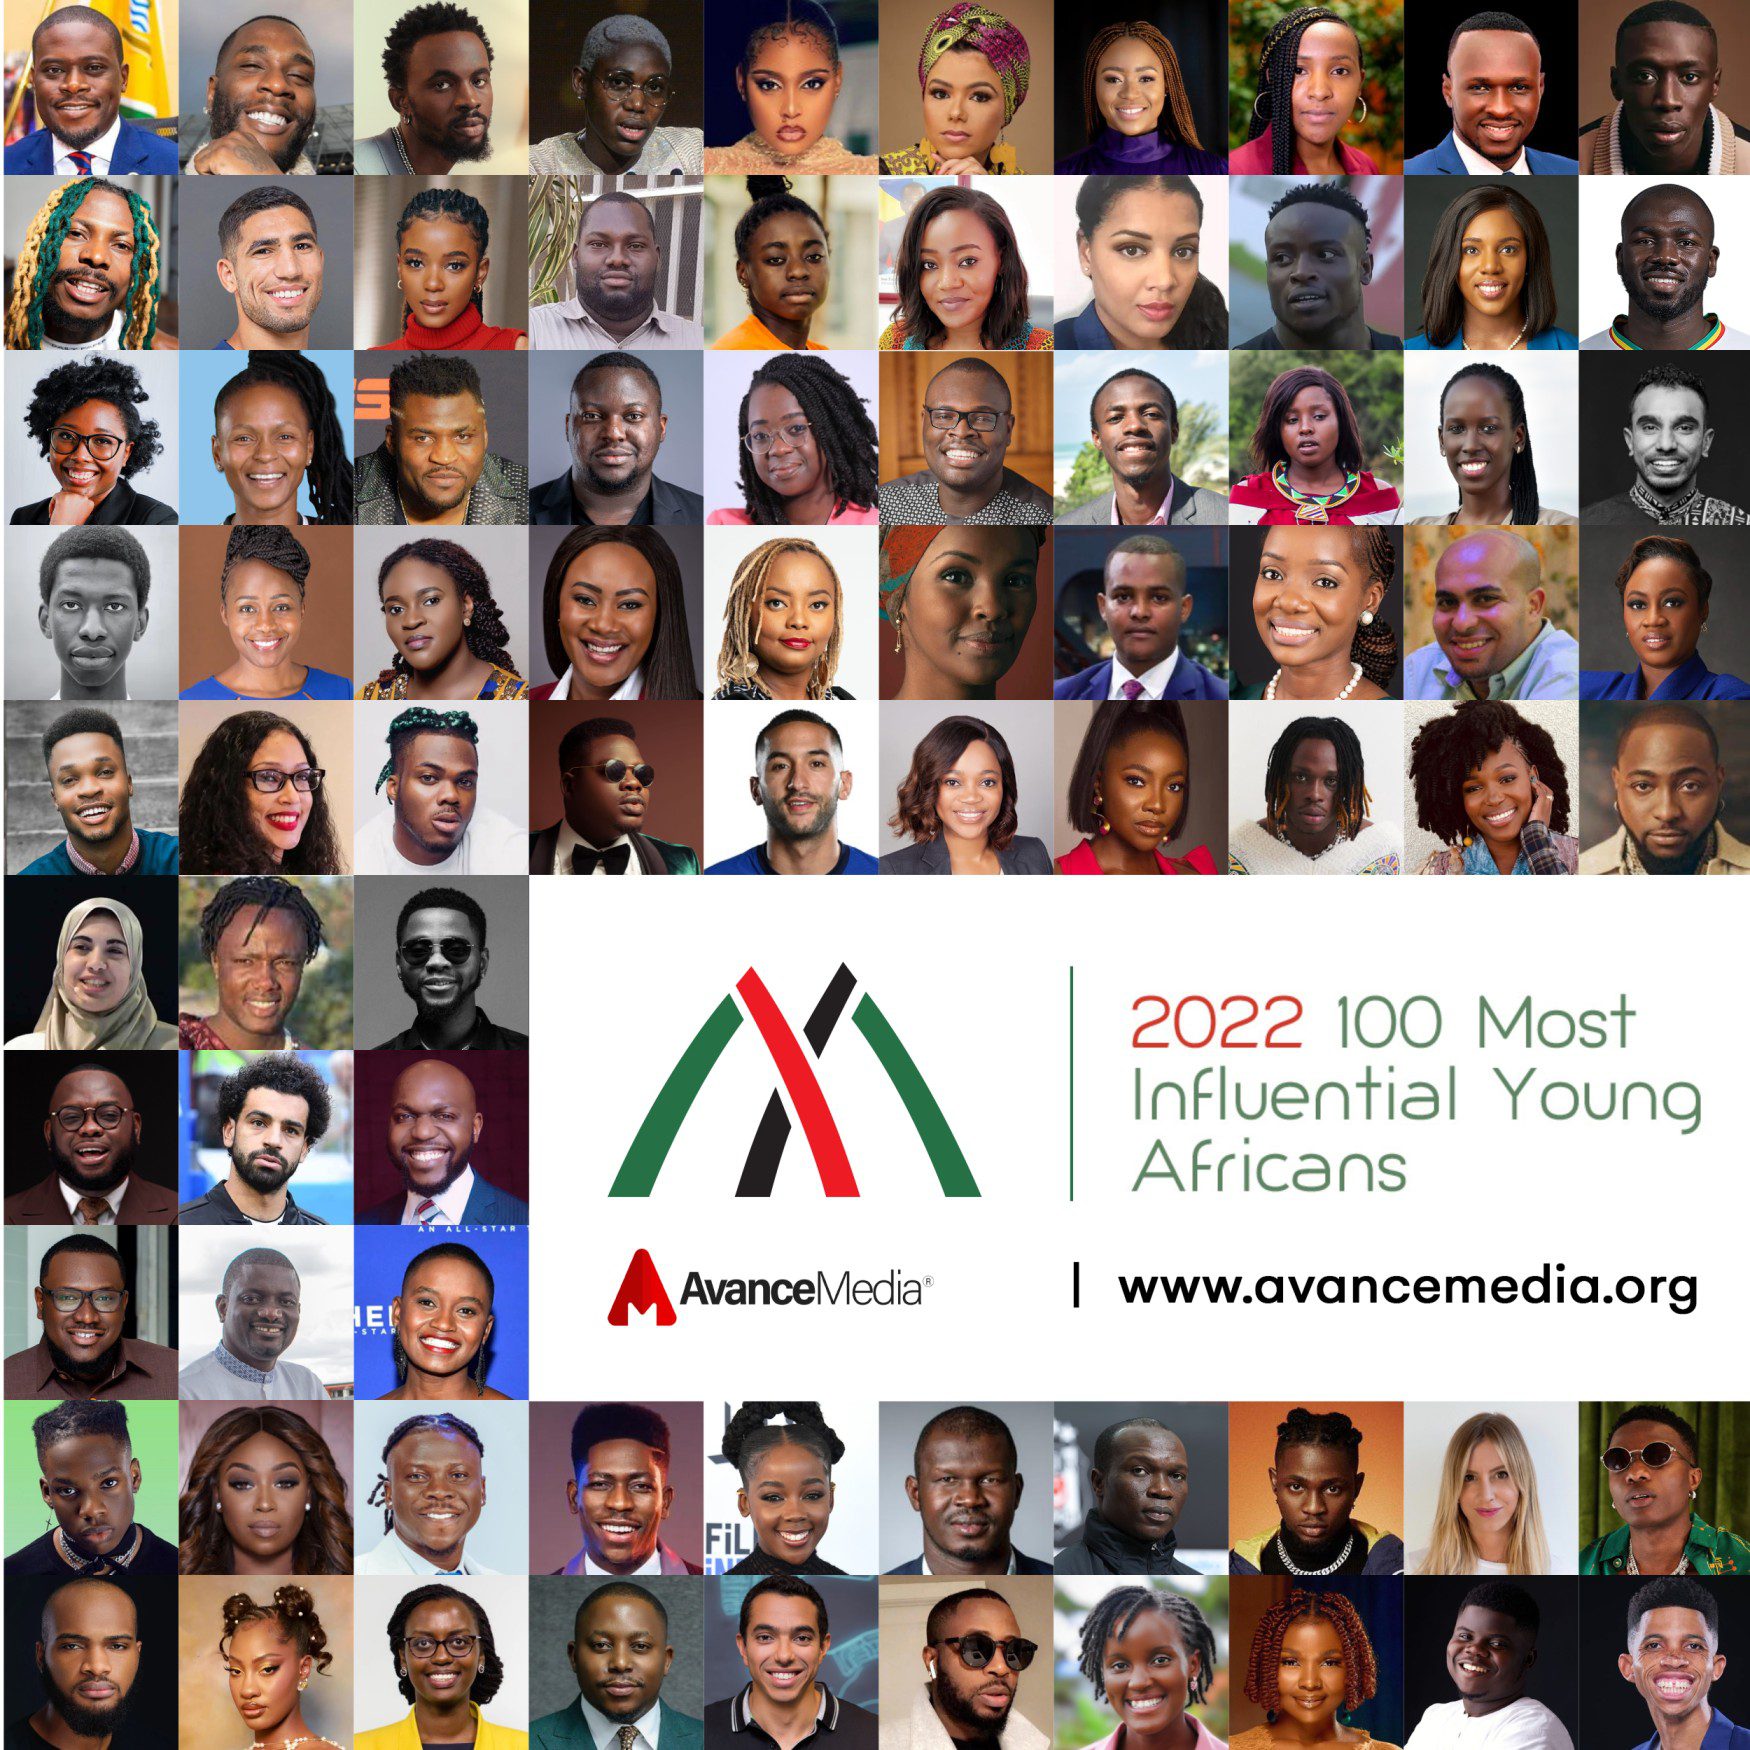 Avance Media Announces 2022's 100 Most Influential Young Africans